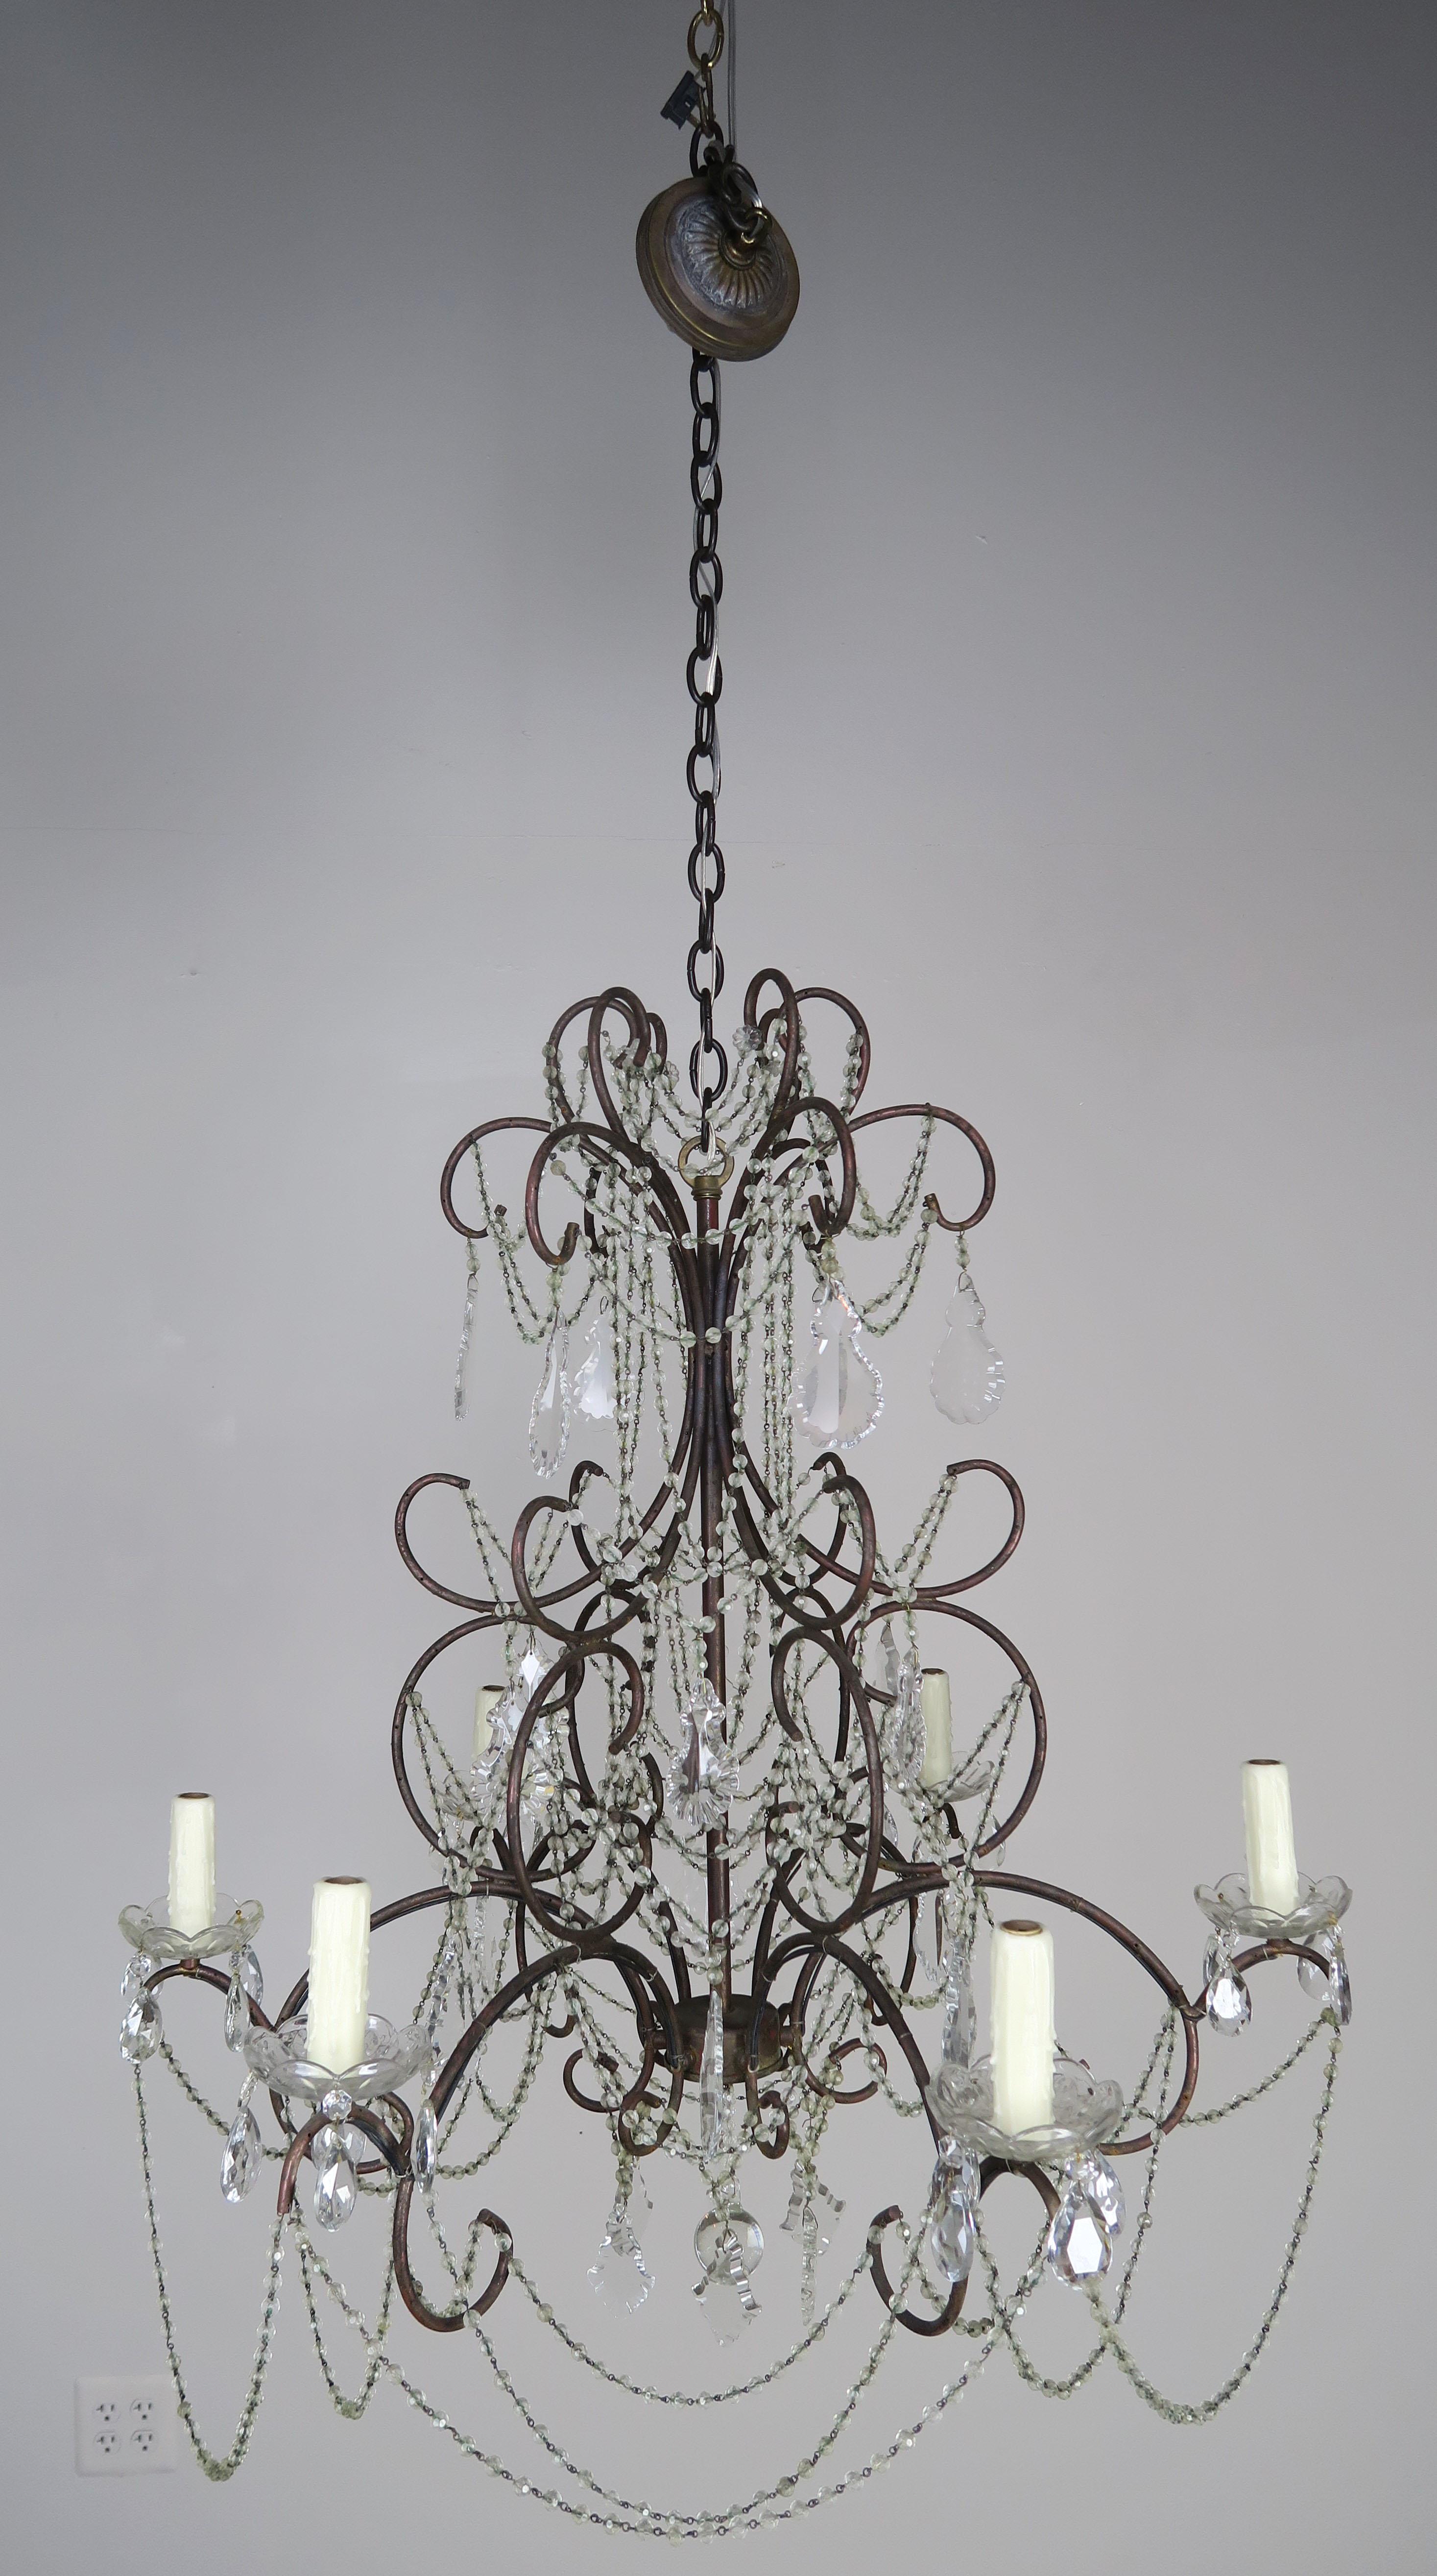 French six light iron chandelier adorned with garlands of crystal beads and crystals throughout. Clear crystal ball at bottom of chandelier. The fixture is newly rewired with drip wax candle covers. The fixture includes both chain and canopy and is